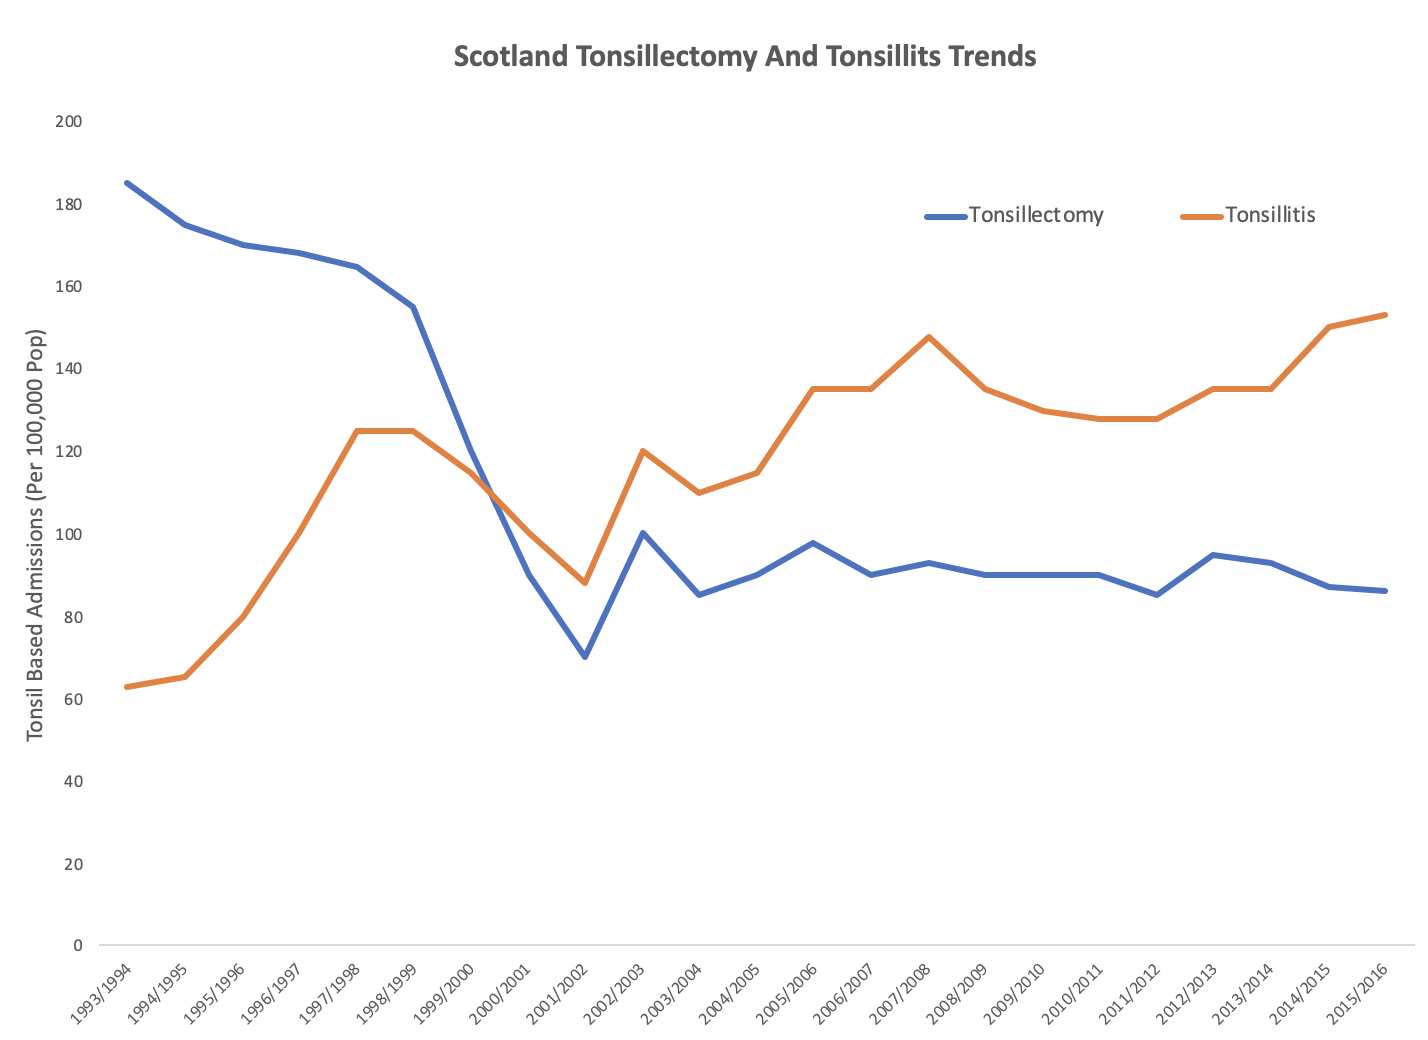 Line graph illustrating tonsillectomy and tonsillitis rates in Scotland over the years.